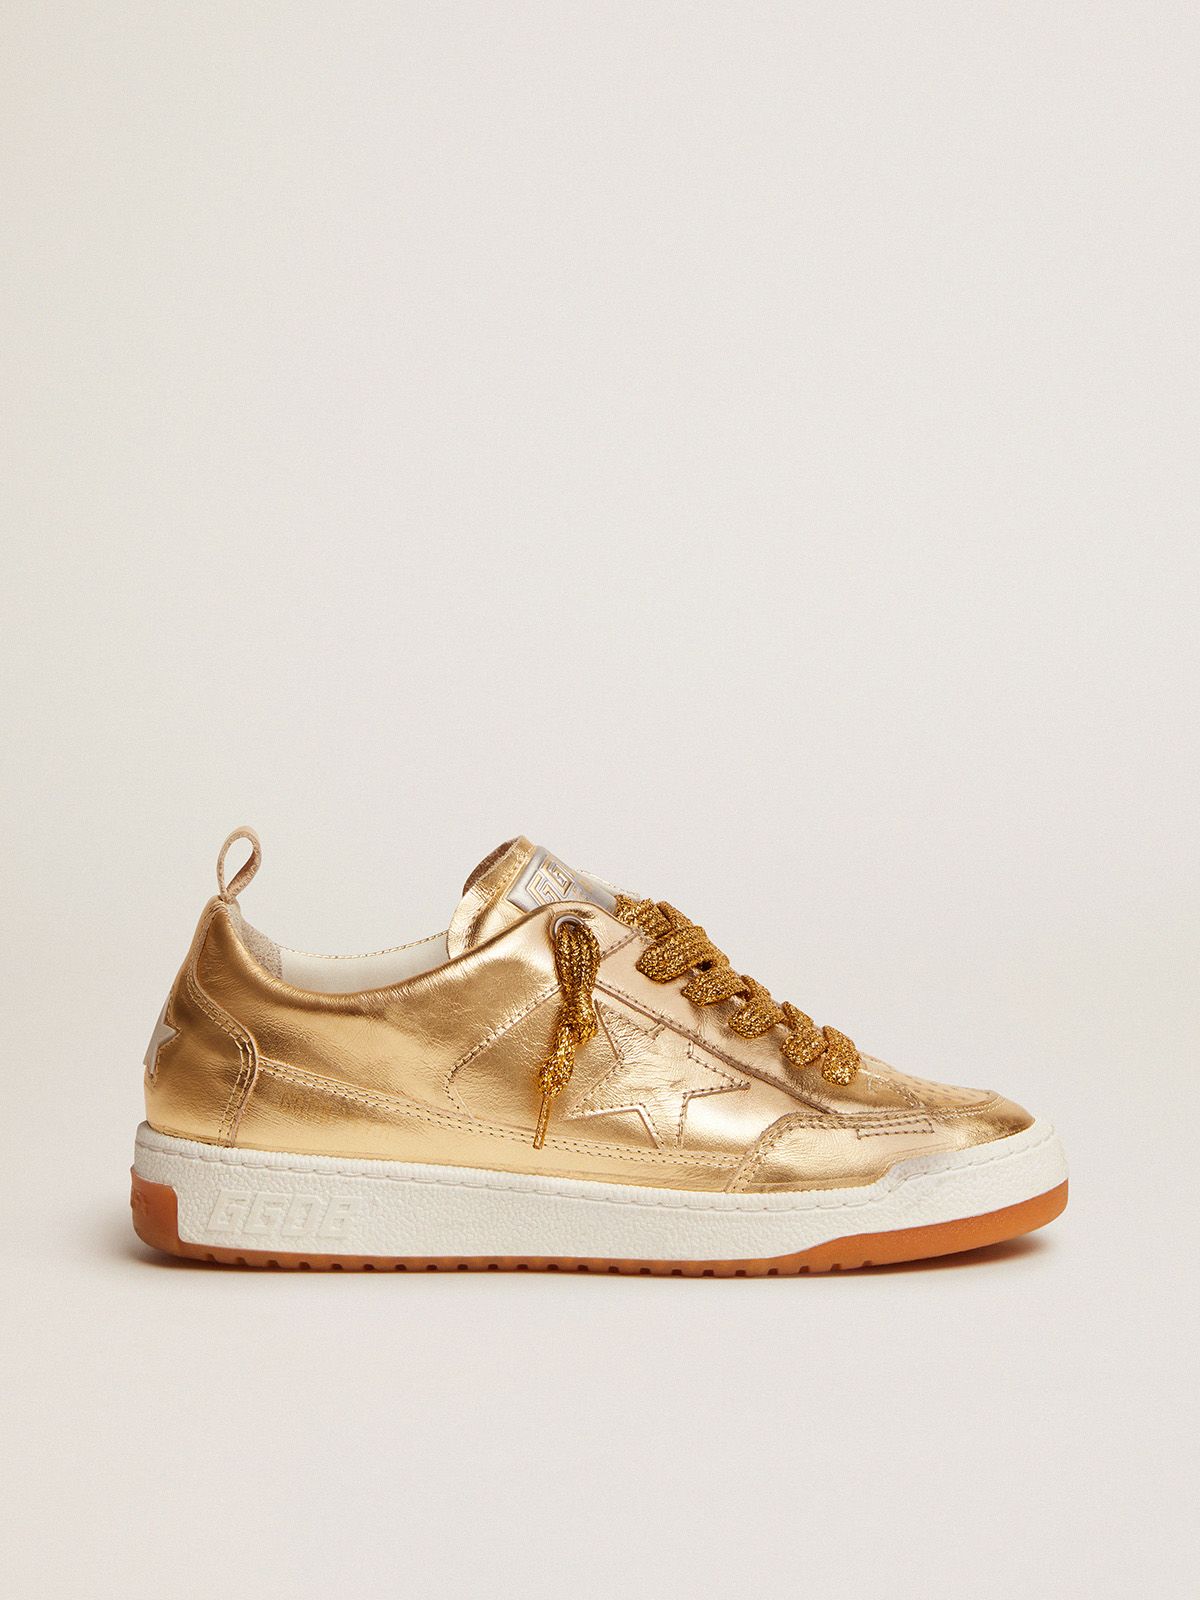 Golden Goose Superstar Yeah sneakers in gold laminated leather